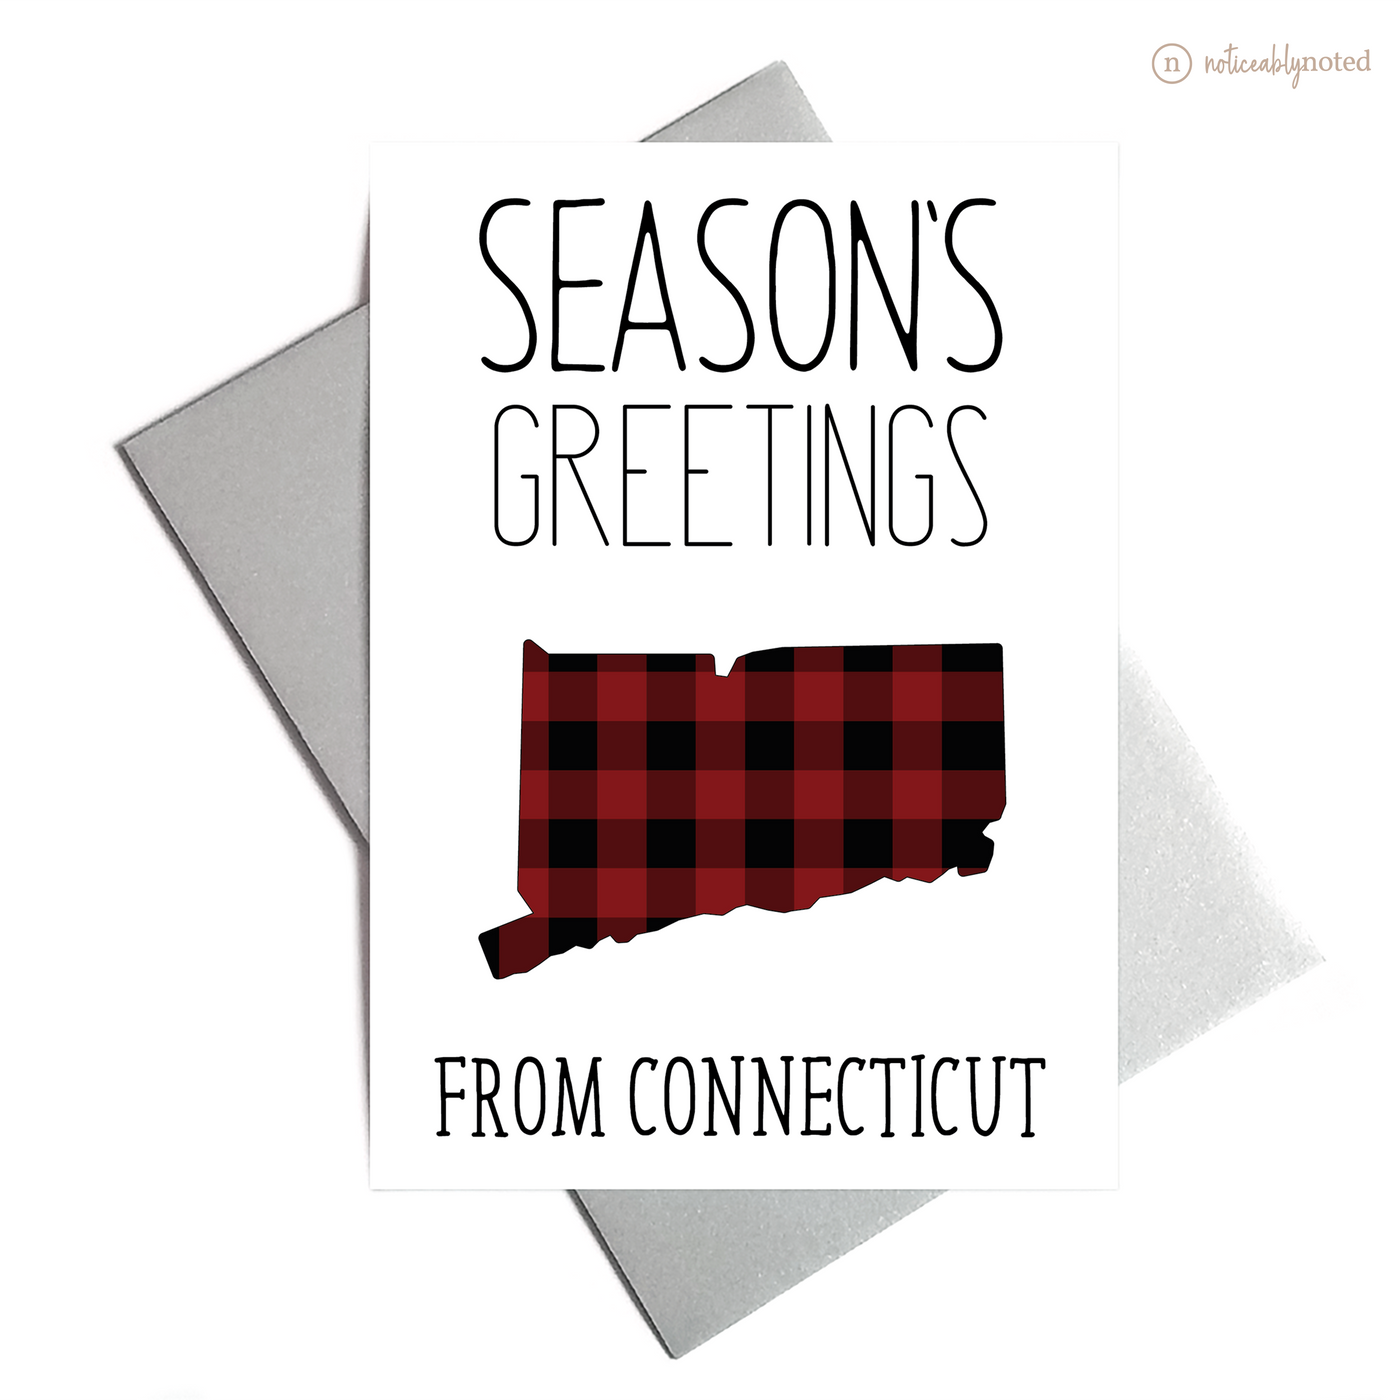 Connecticut Christmas Cards | Noticeably Noted